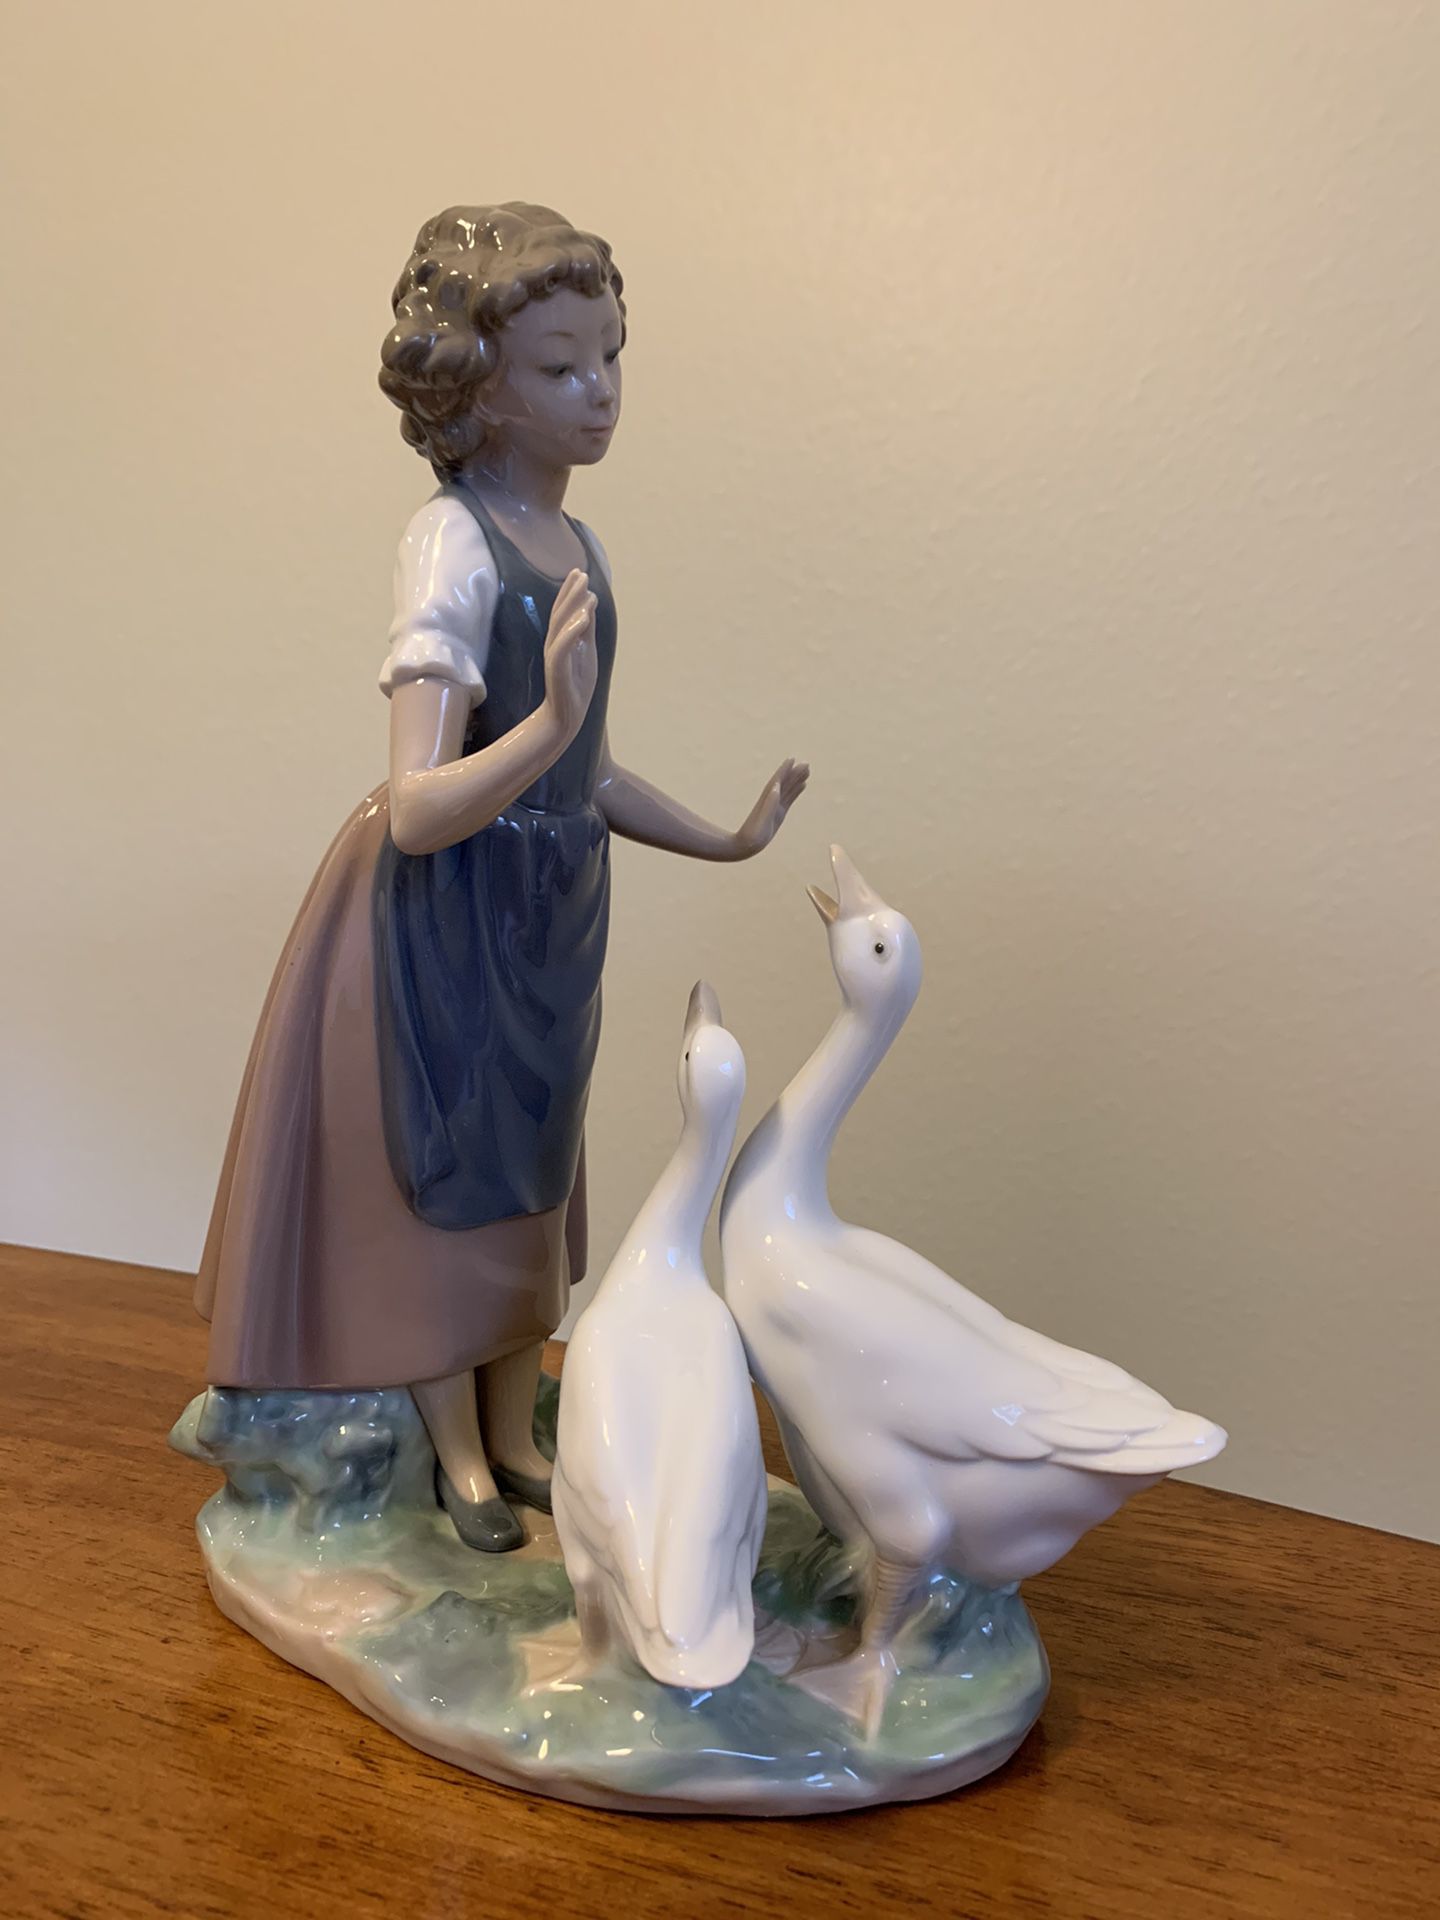 Lladro Figurine “Girl with Swans”